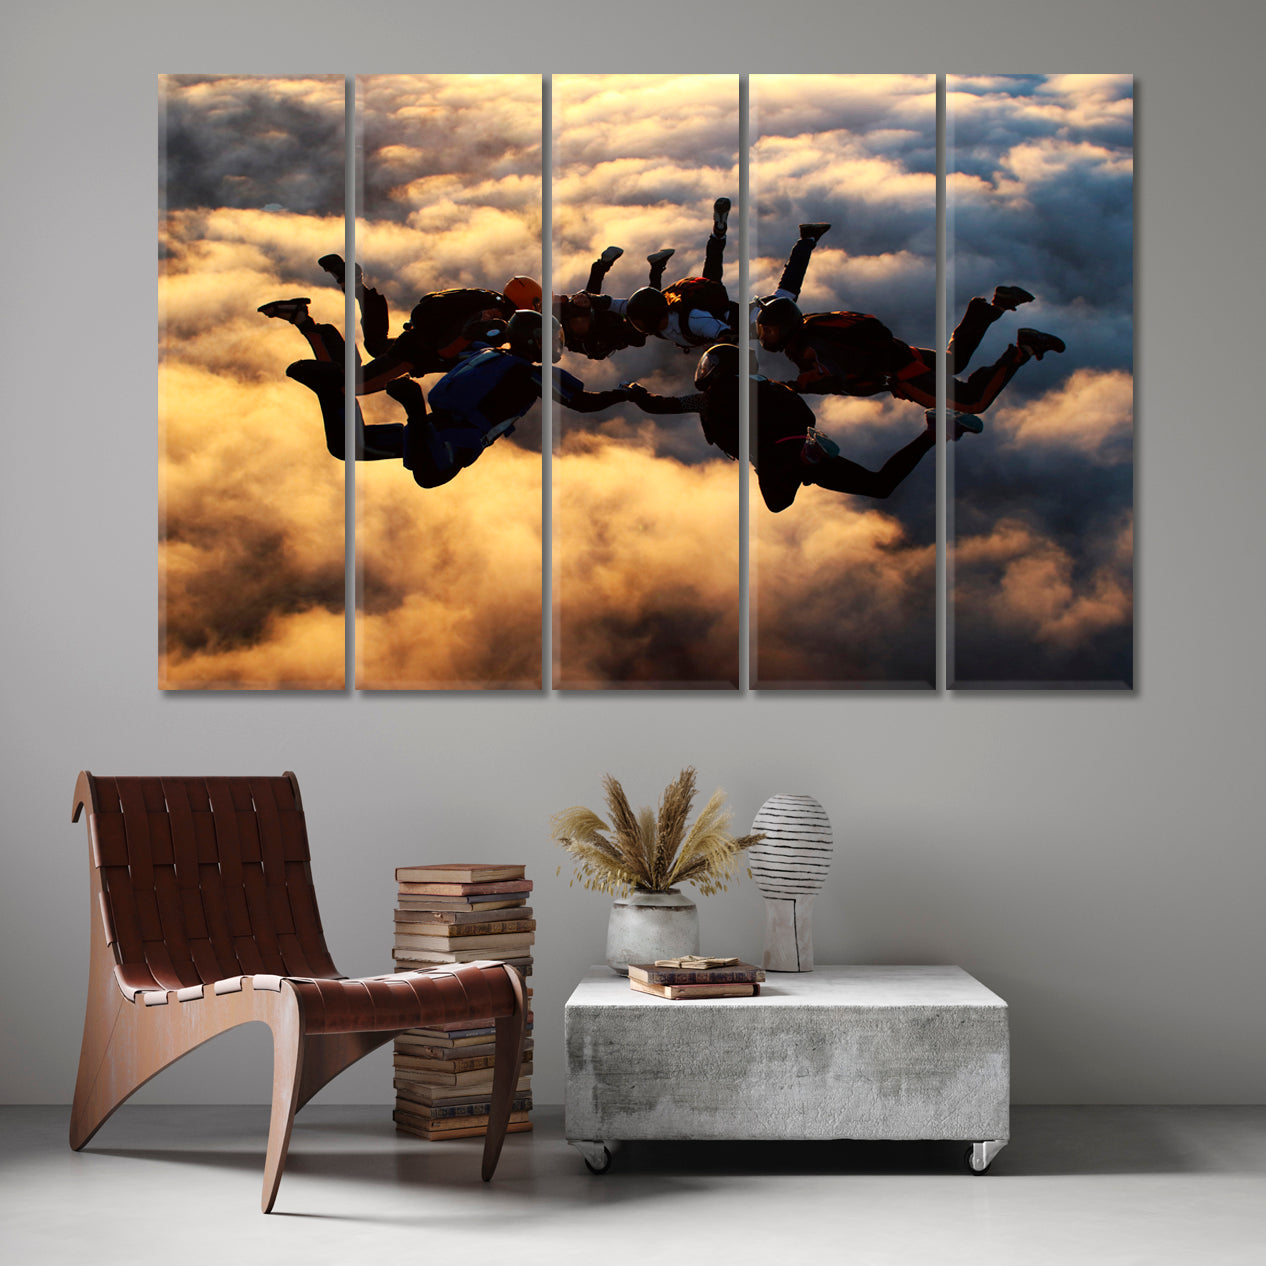 Sunset Skydiving Skyscape Canvas Artesty 5 panels 36" x 24" 